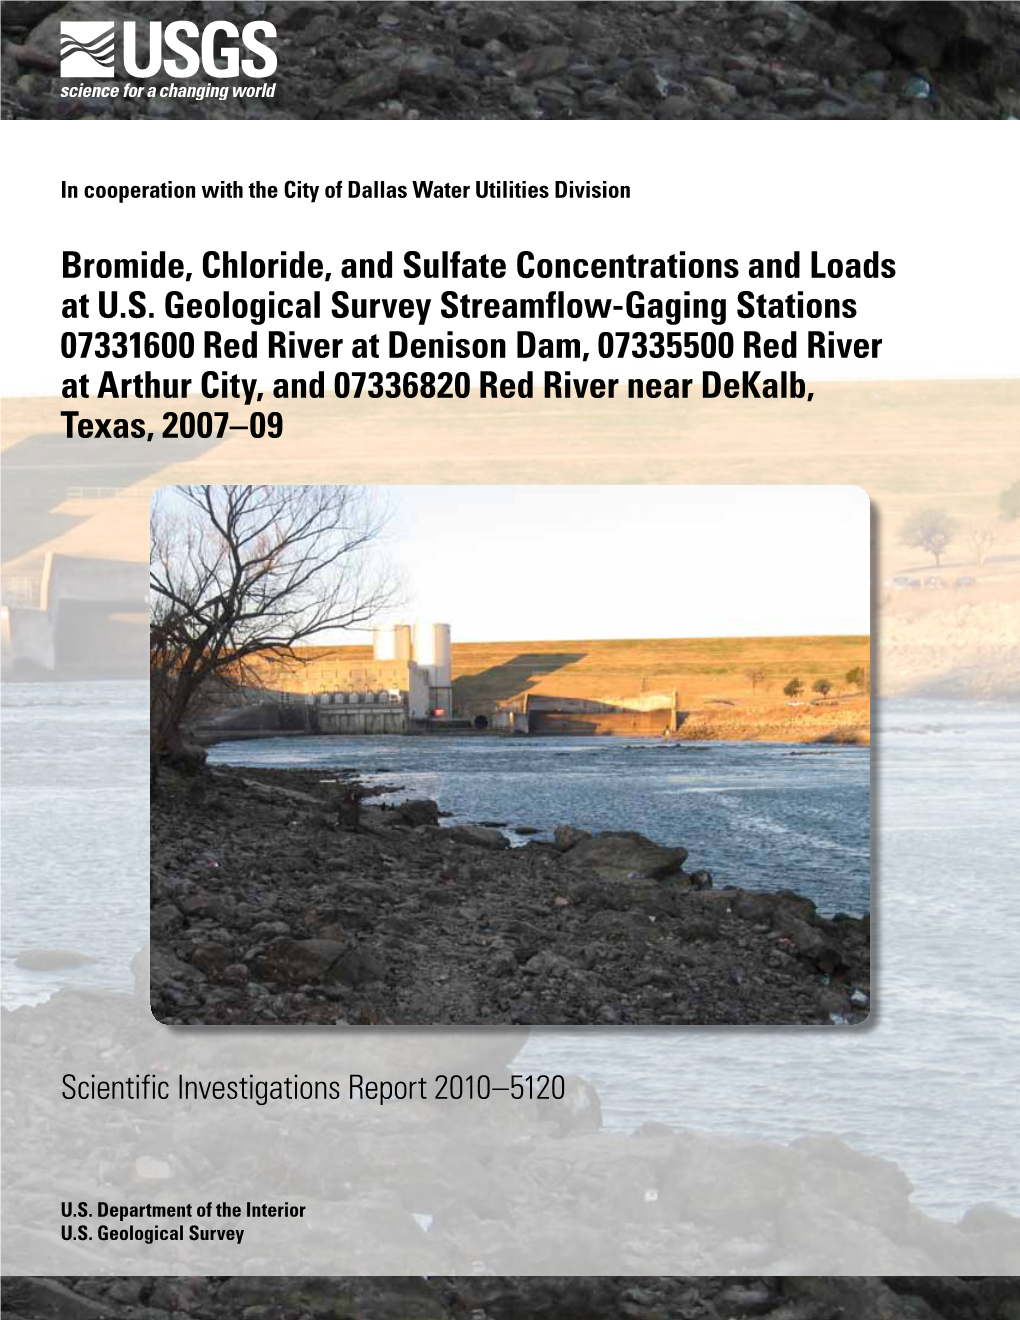 Bromide, Chloride, and Sulfate Concentrations and Loads at USGS Streamflow-Gaging Stations, Texas